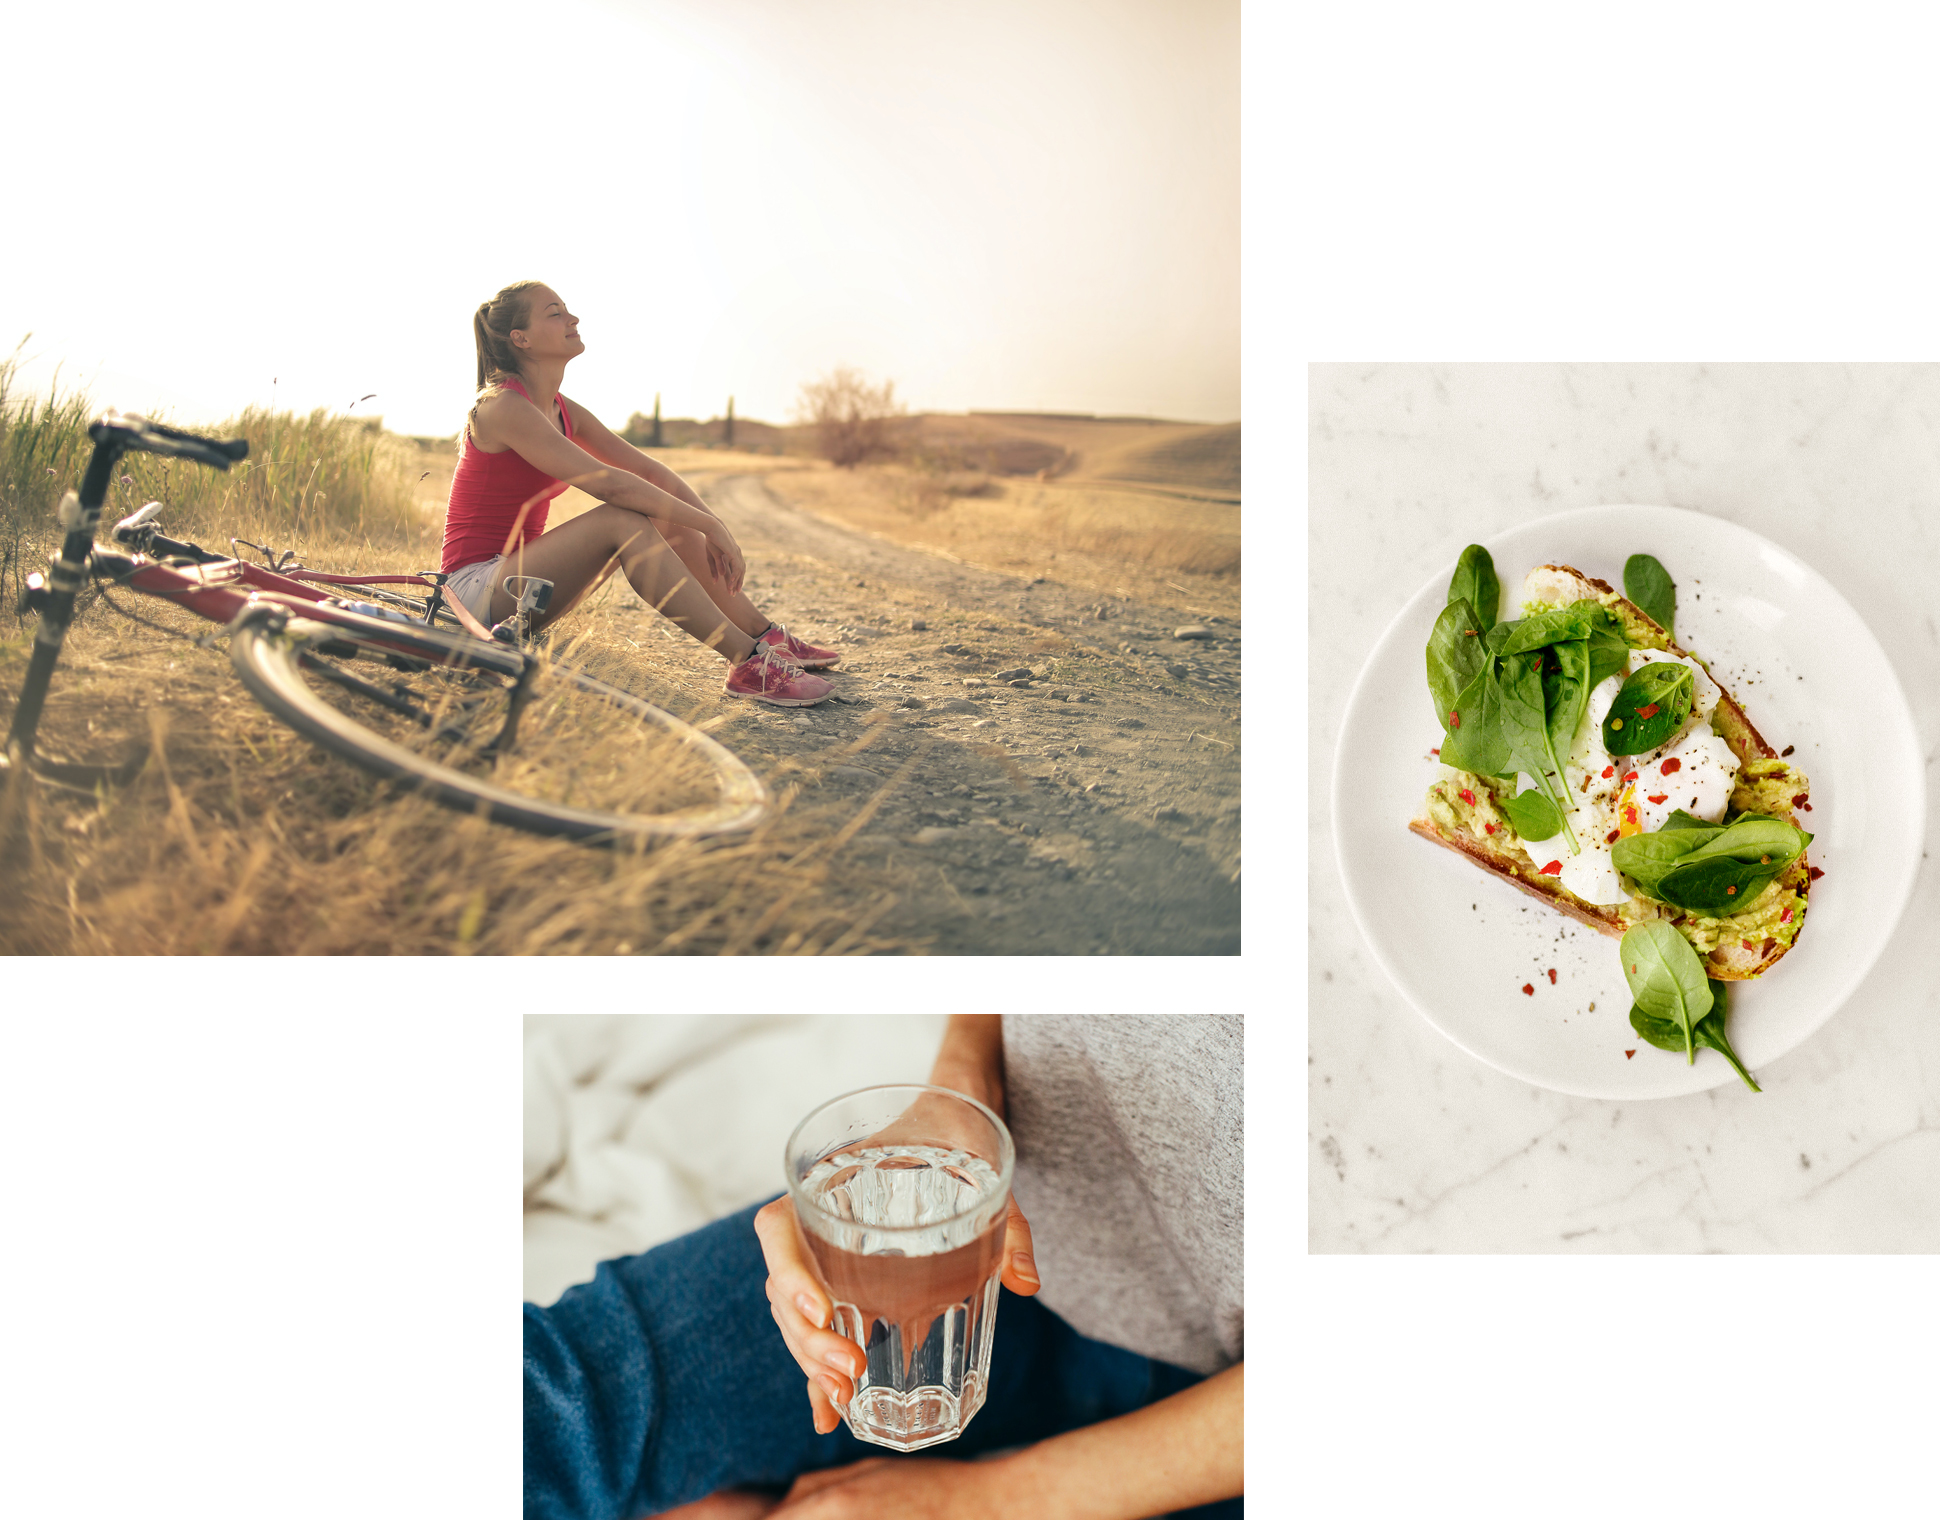 images showing food, water and exercise